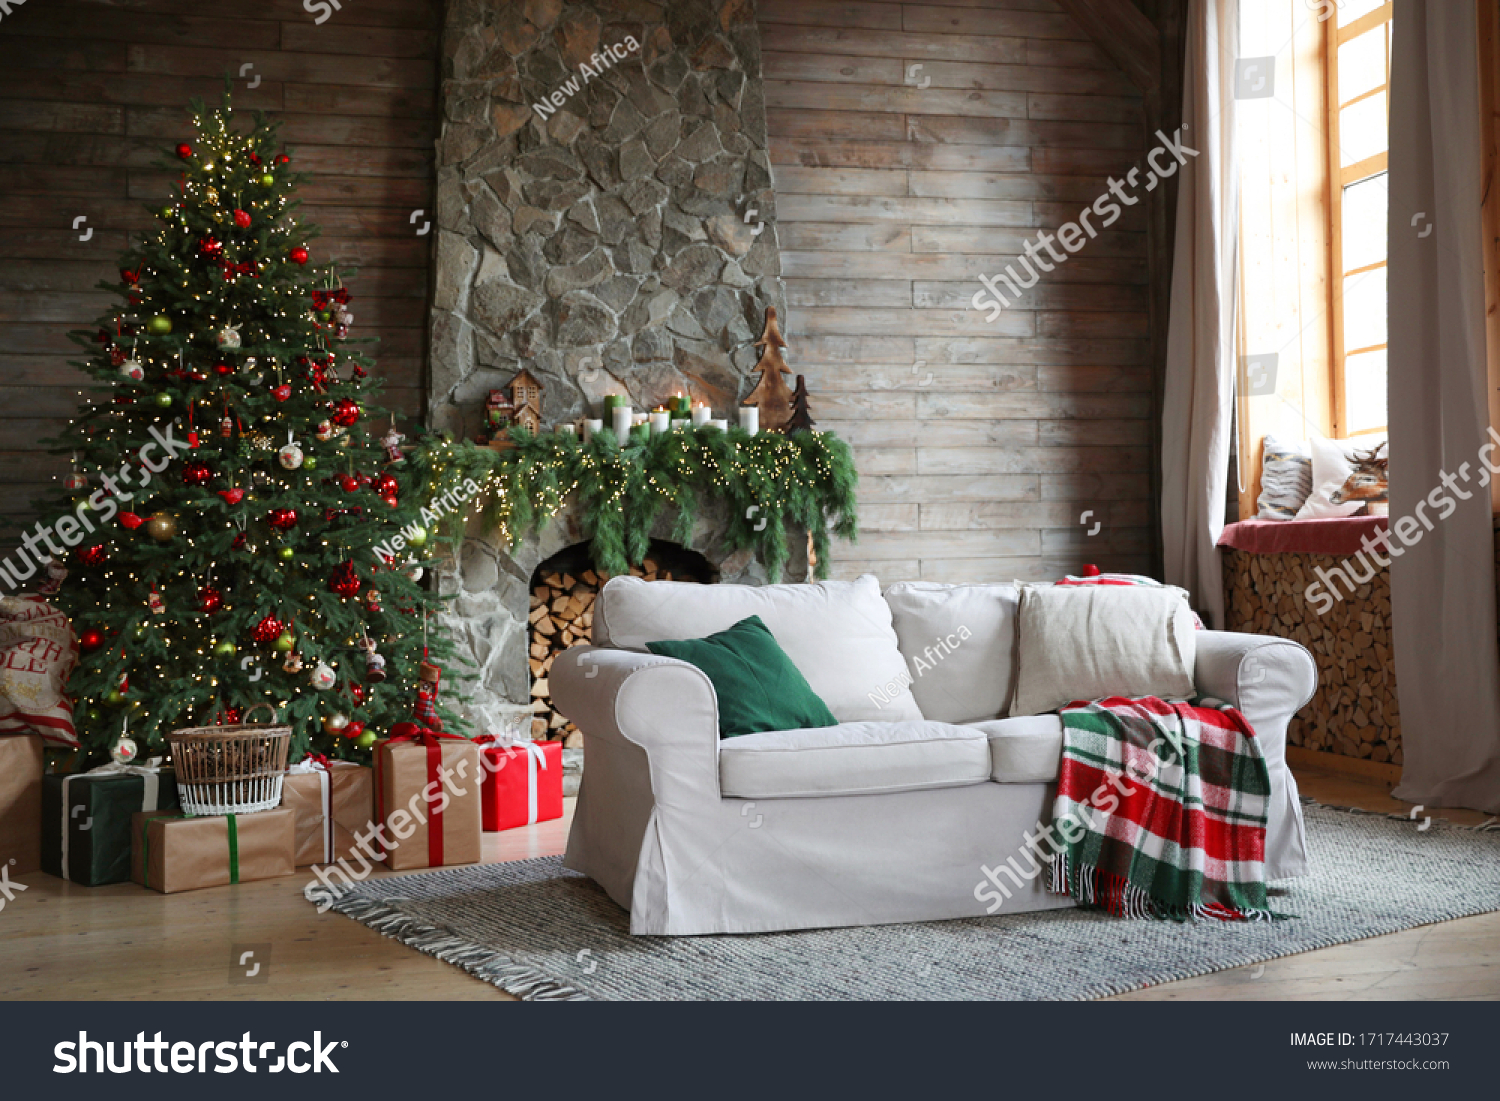 Festive interior with comfortable sofa and decorated Christmas tree #1717443037